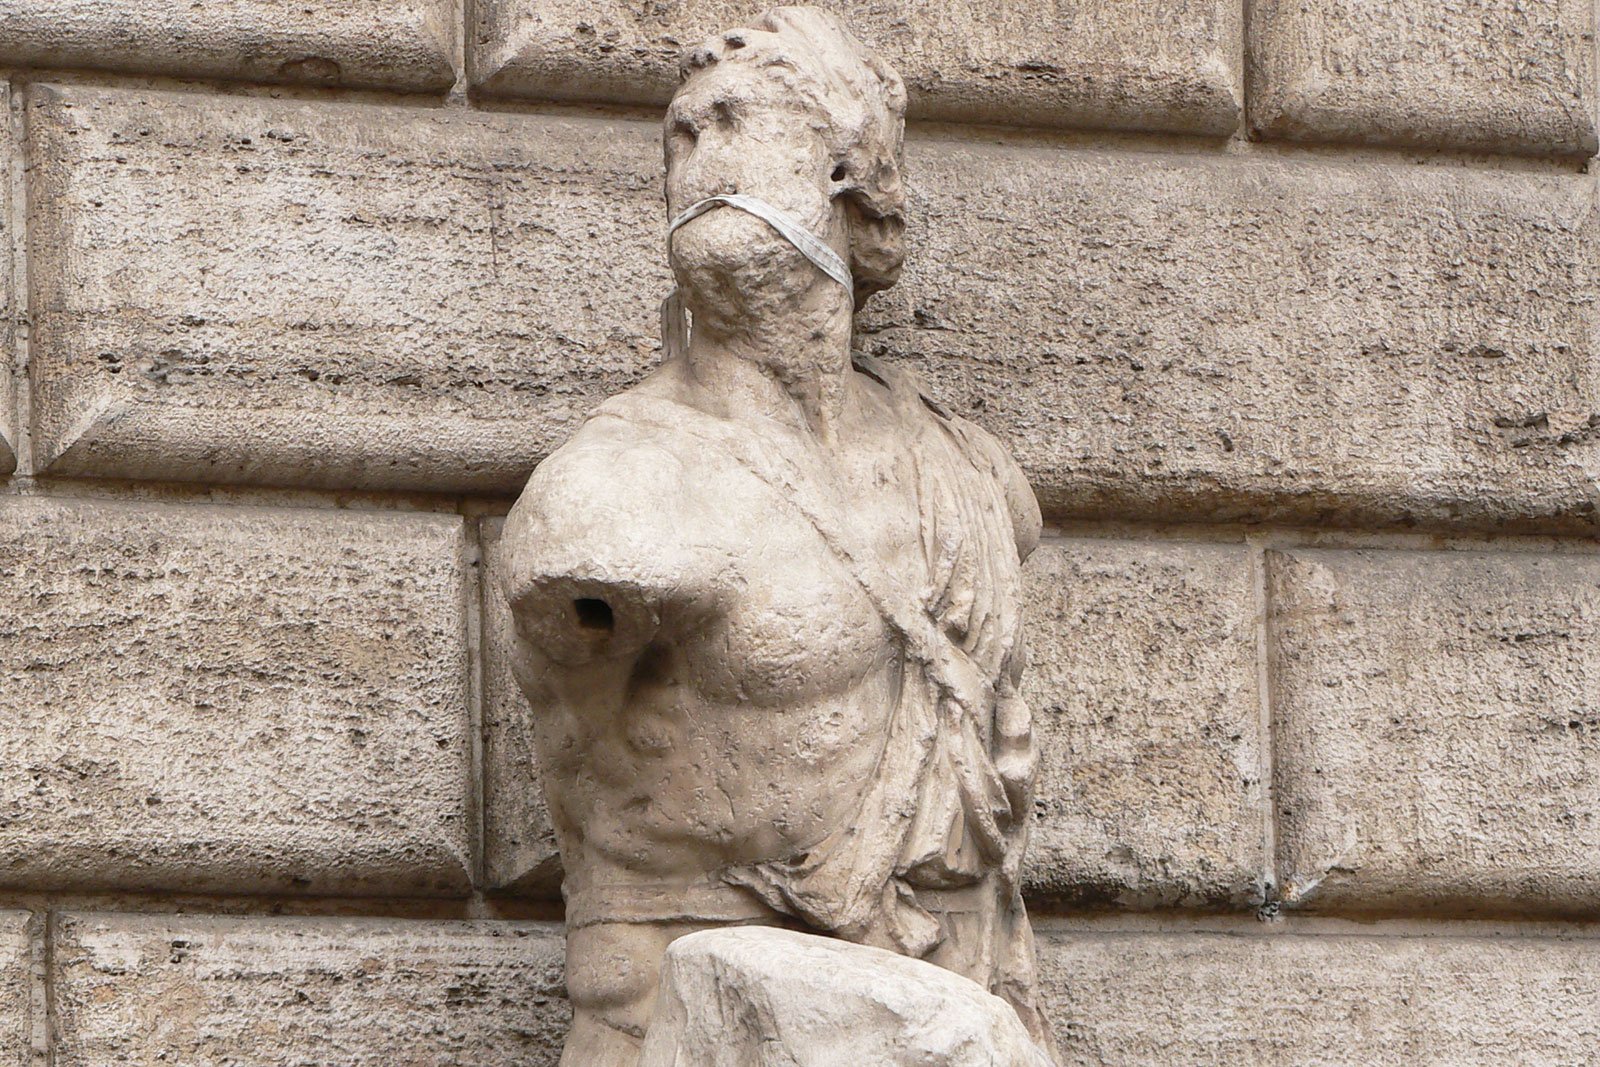 How to have a small talk with the statue in Rome